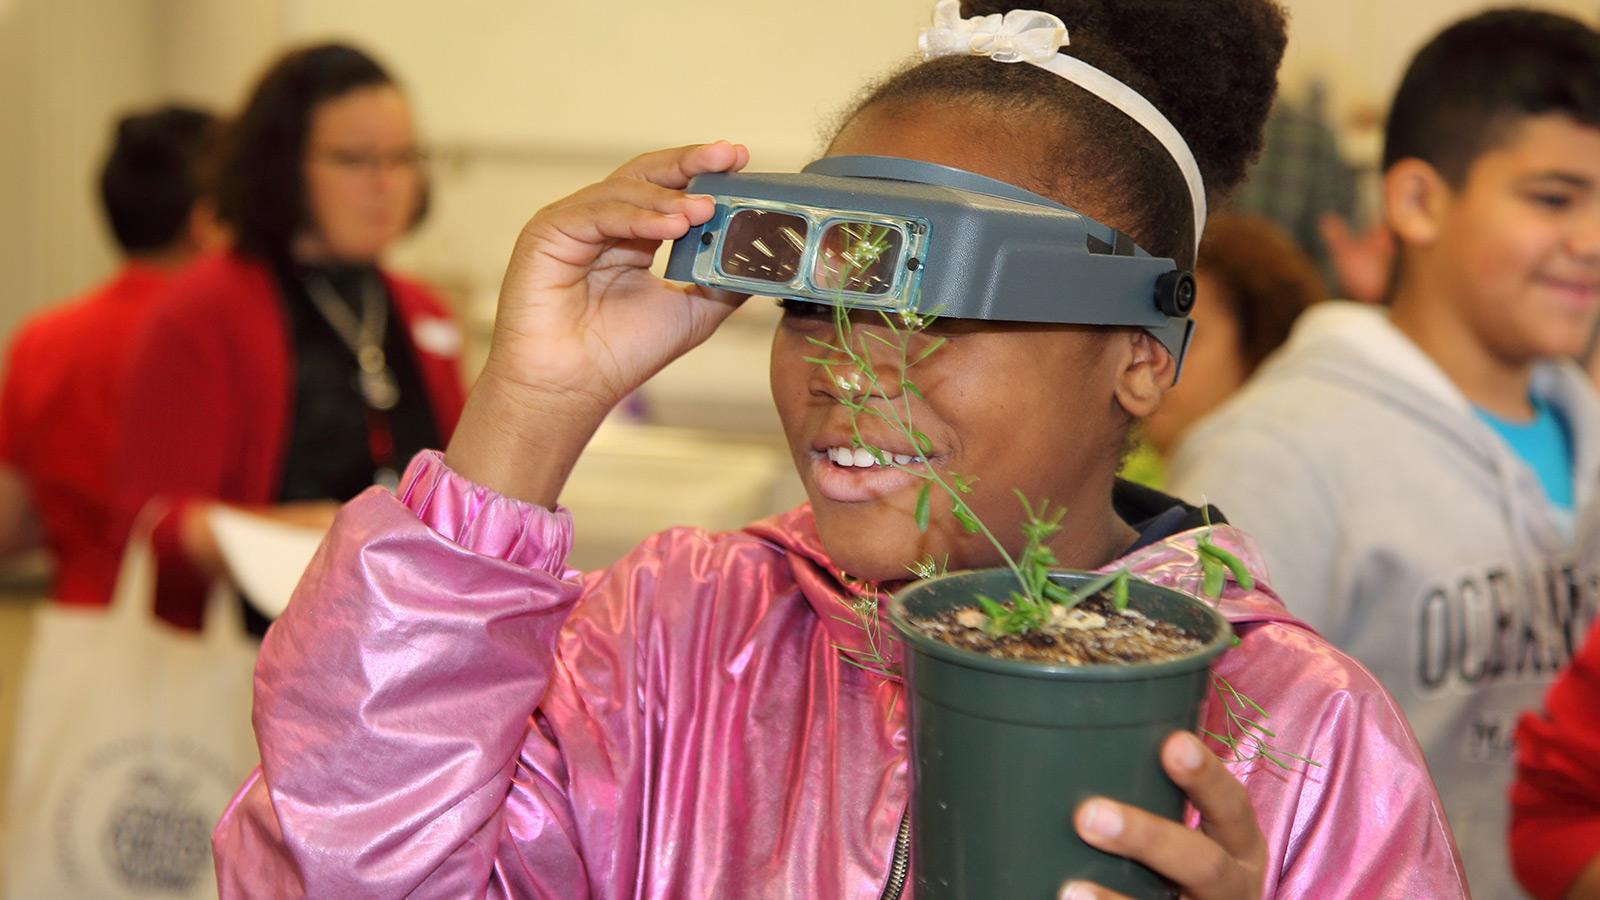 Middle school student wearing a magnifying headband and holding an Arabidopsis plant